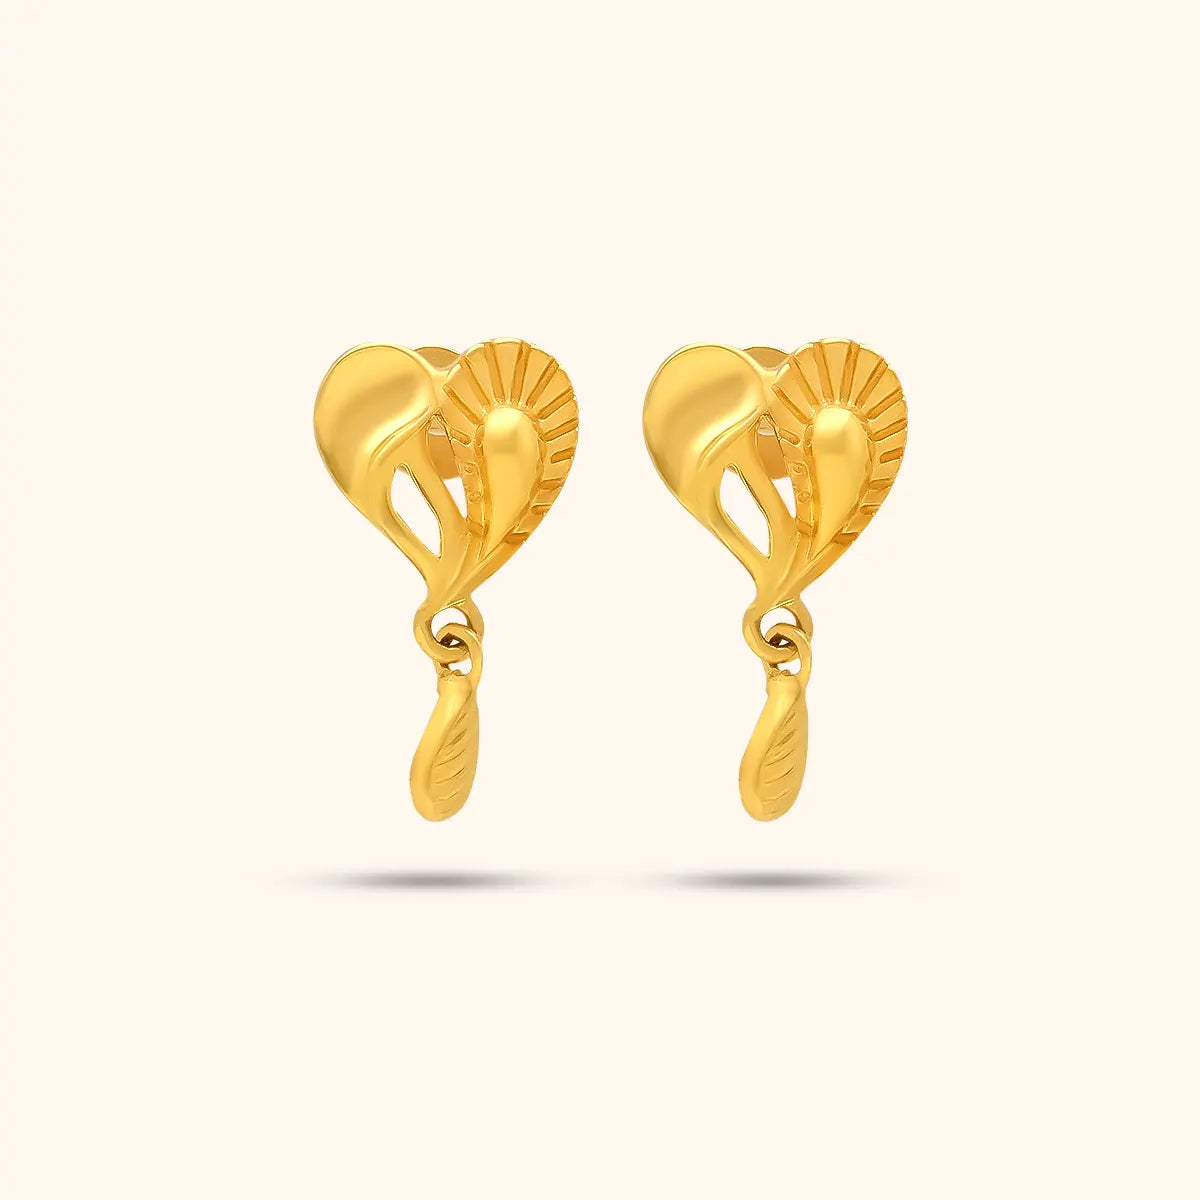 Heart-Shaped Earrings with Dangling Leaf Charms 22KT